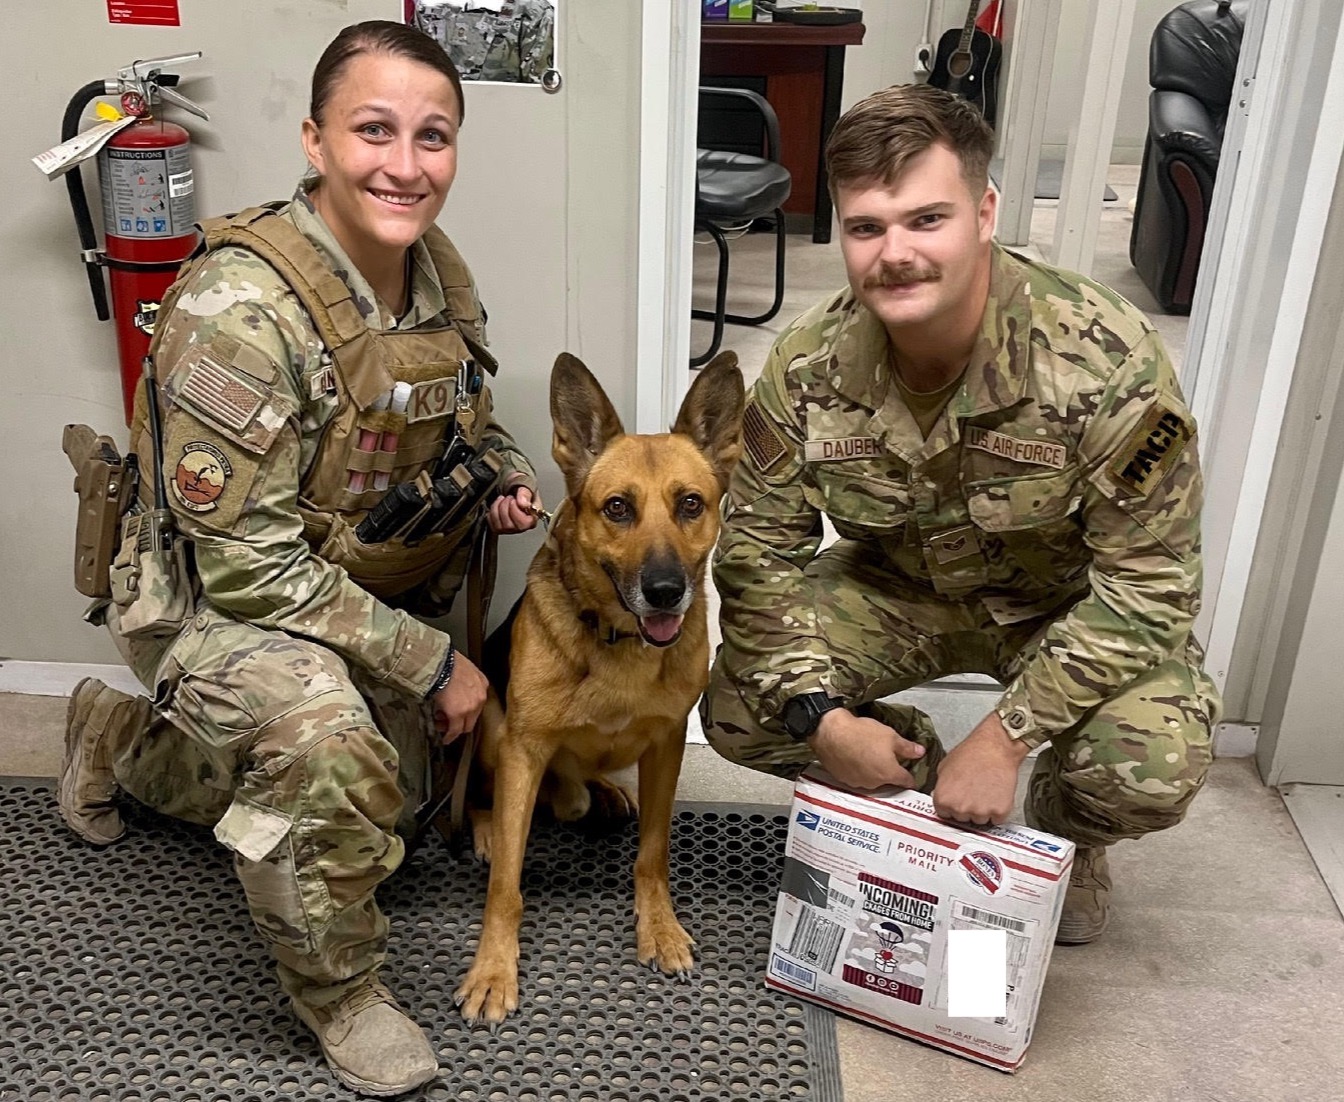 Packages From Home sends K9 care packages to military working dogs too!